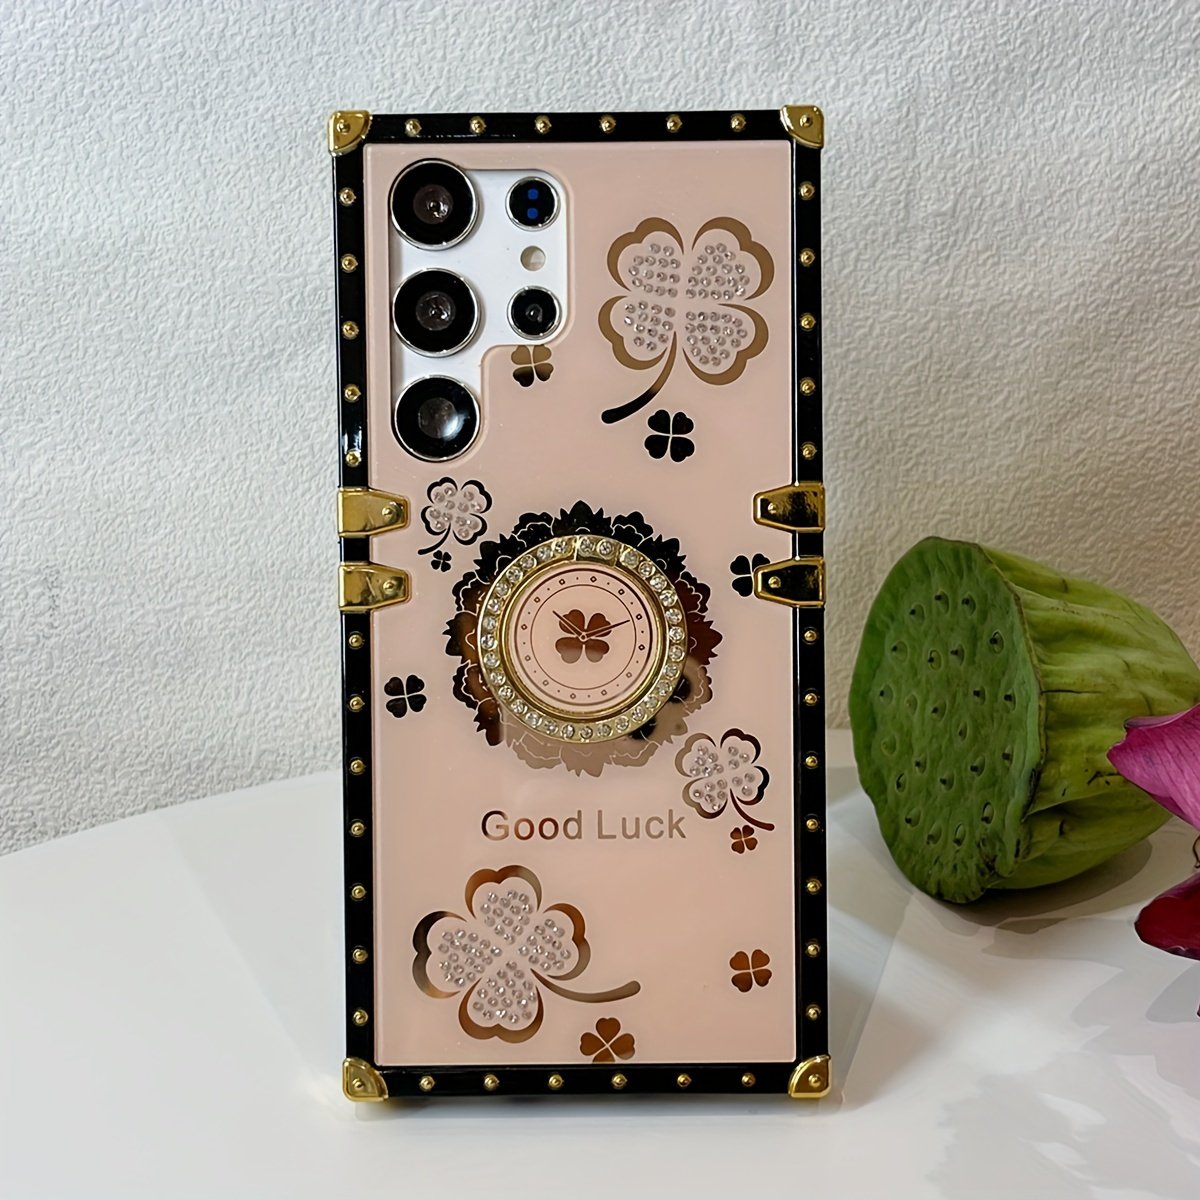 A Square Lucky Four-leaf Clover Stand Gorgeous Fashion Drop Protection Phone Case For IPhone Samsung Phones